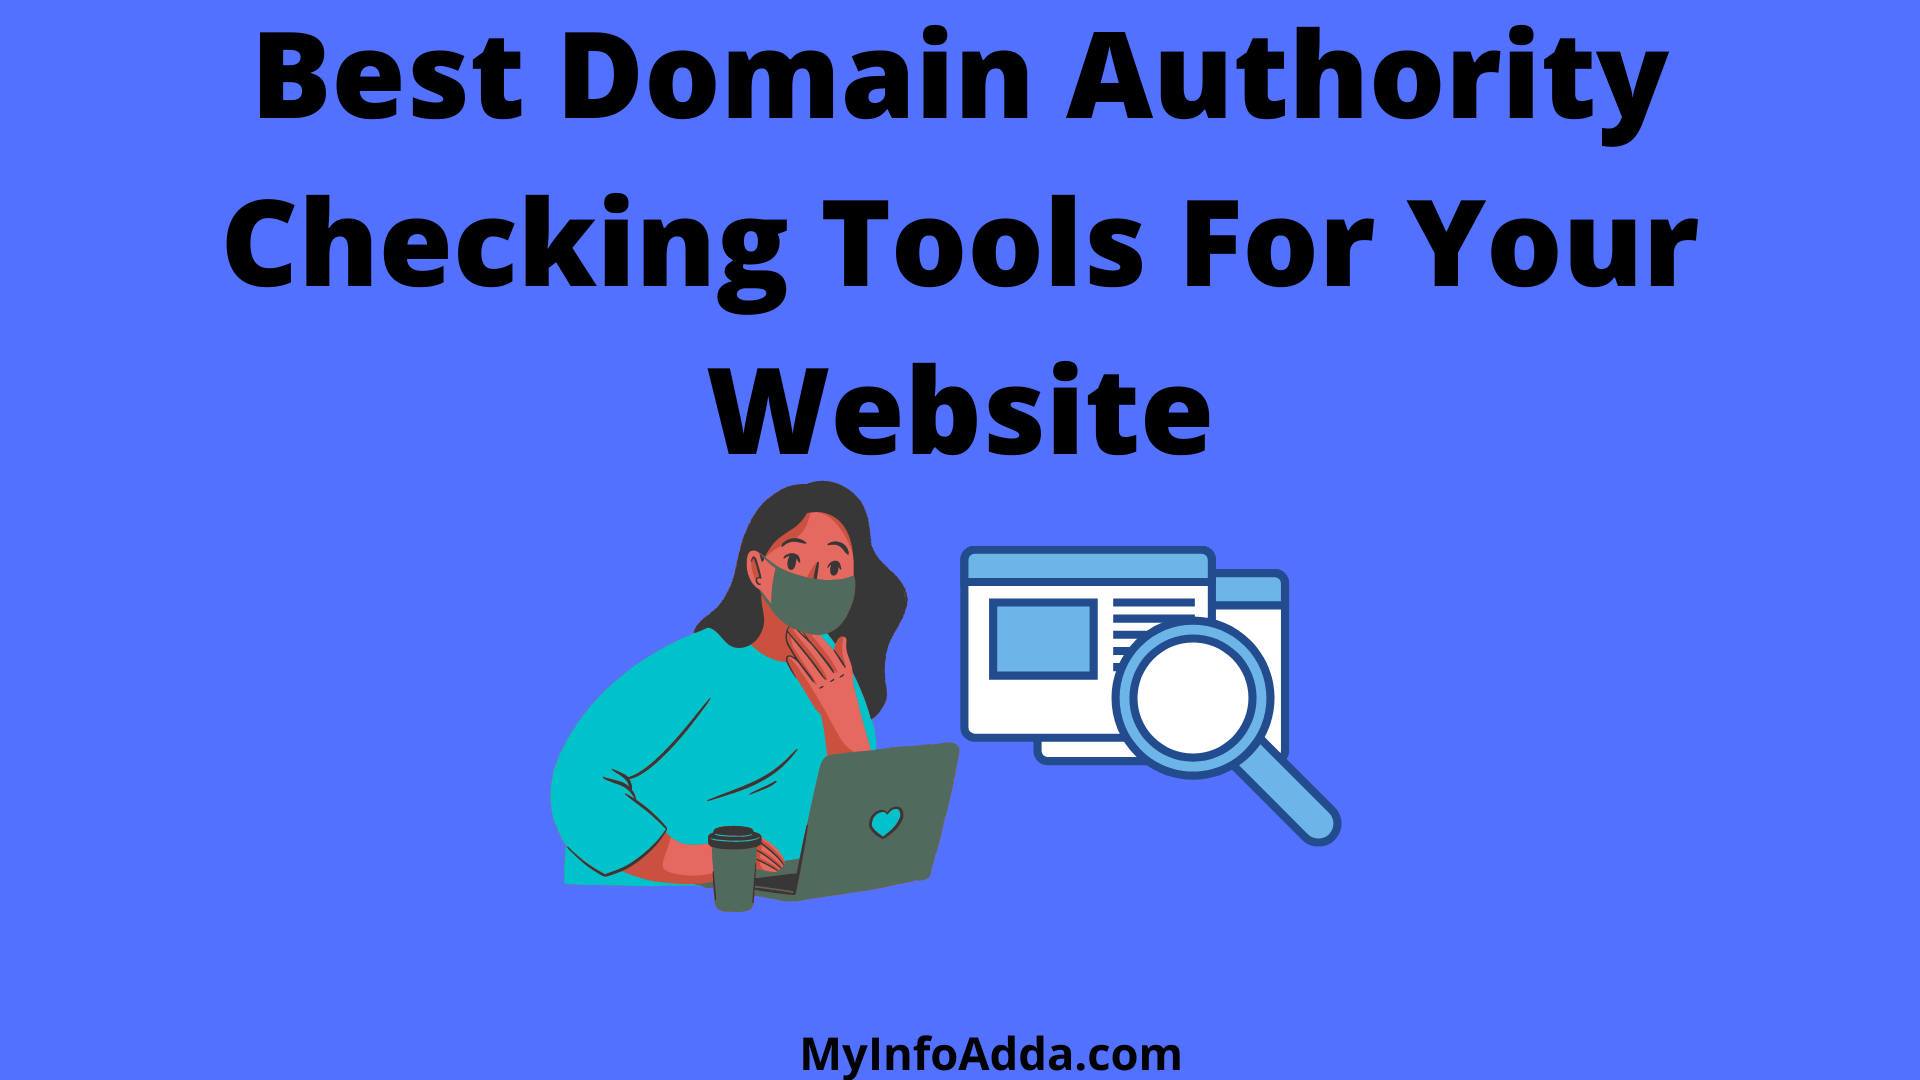 Best Domain Authority Checking Tools For Your Website